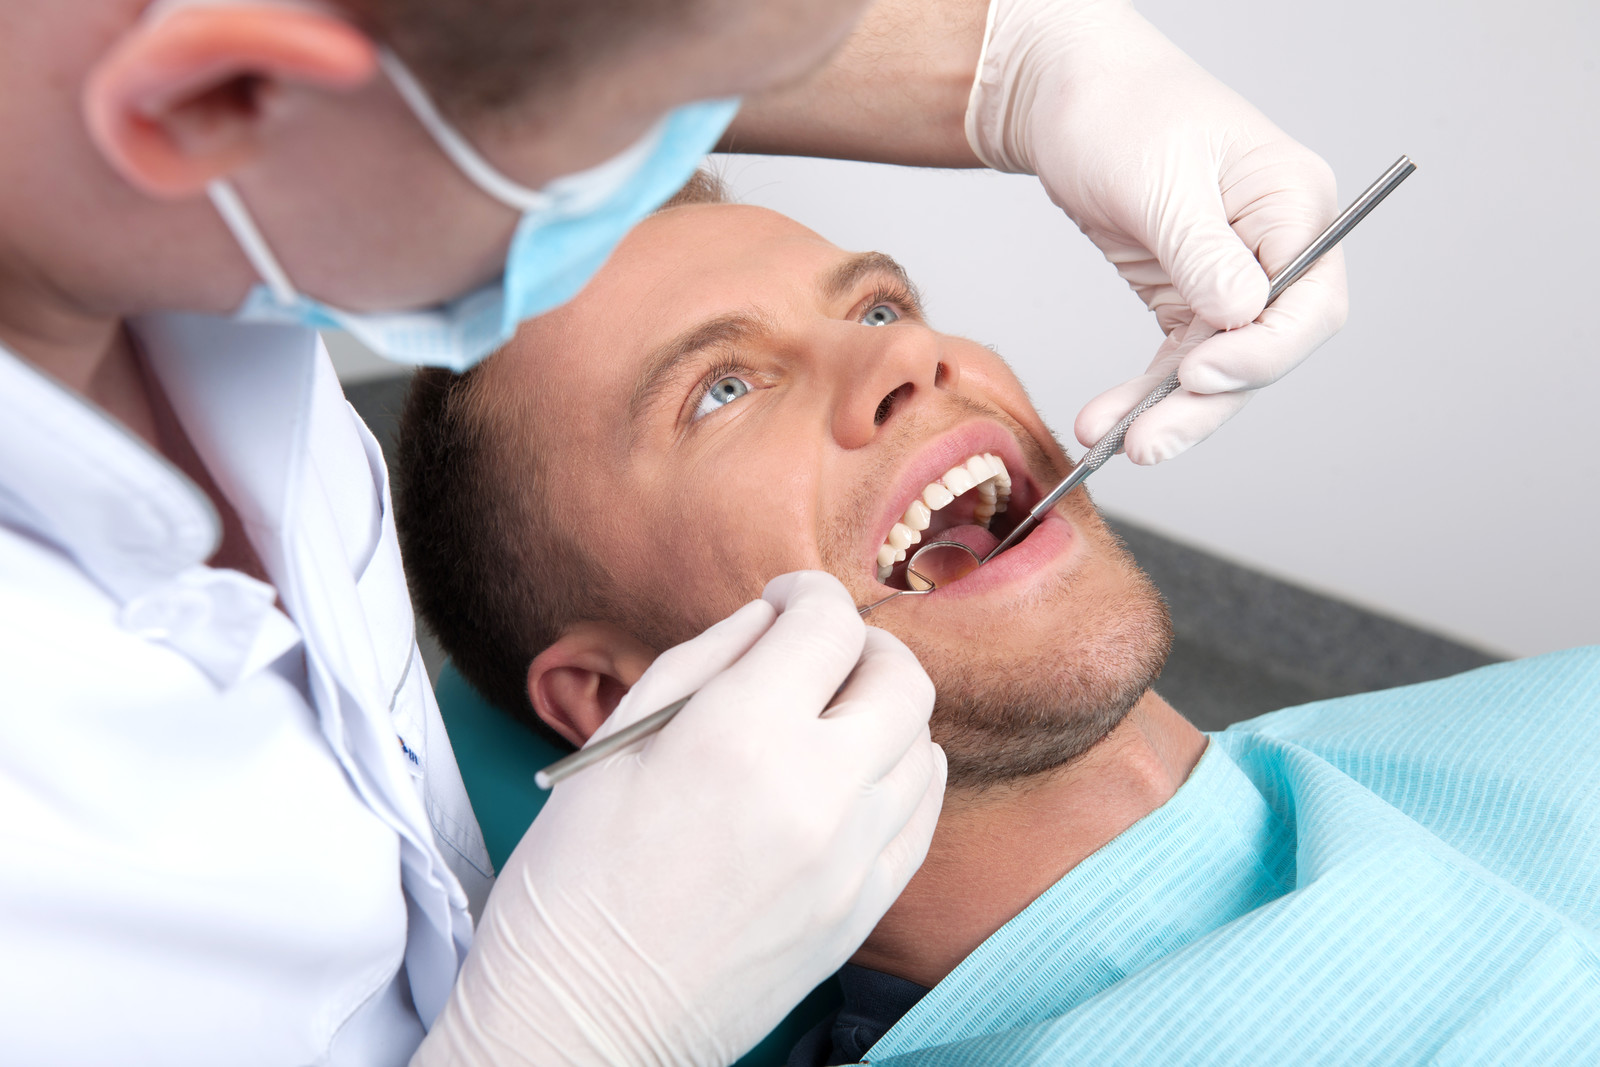 Gum Disease: Symptoms and Preventions